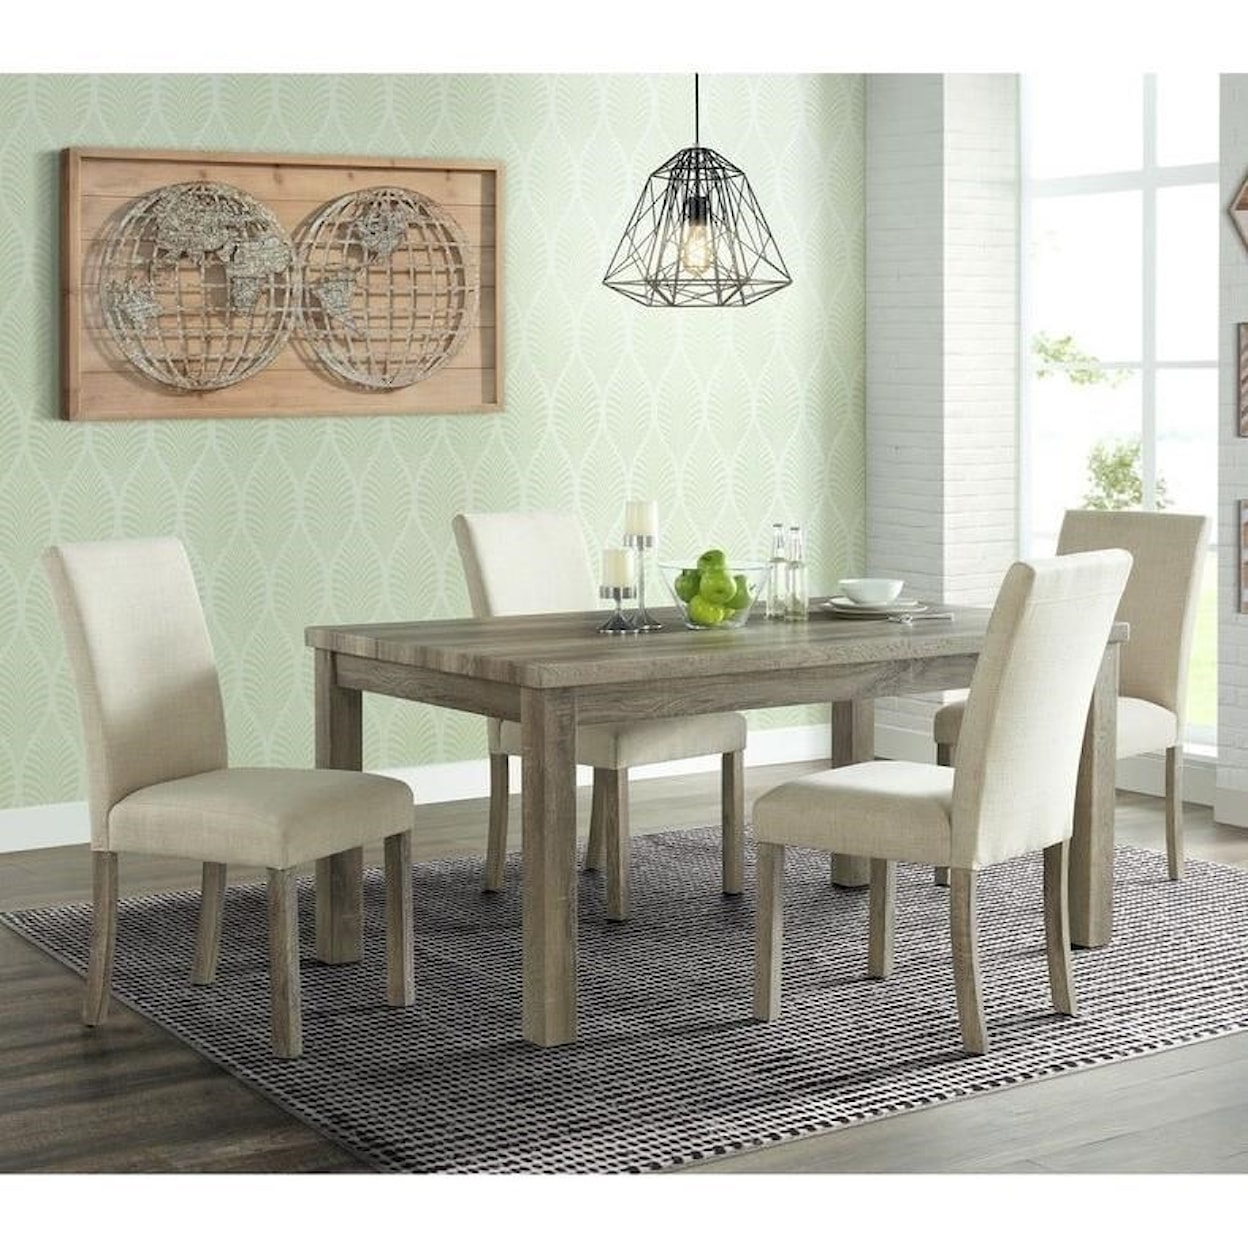 Elements International Oak Lawn 5-Piece Table and Chair Set